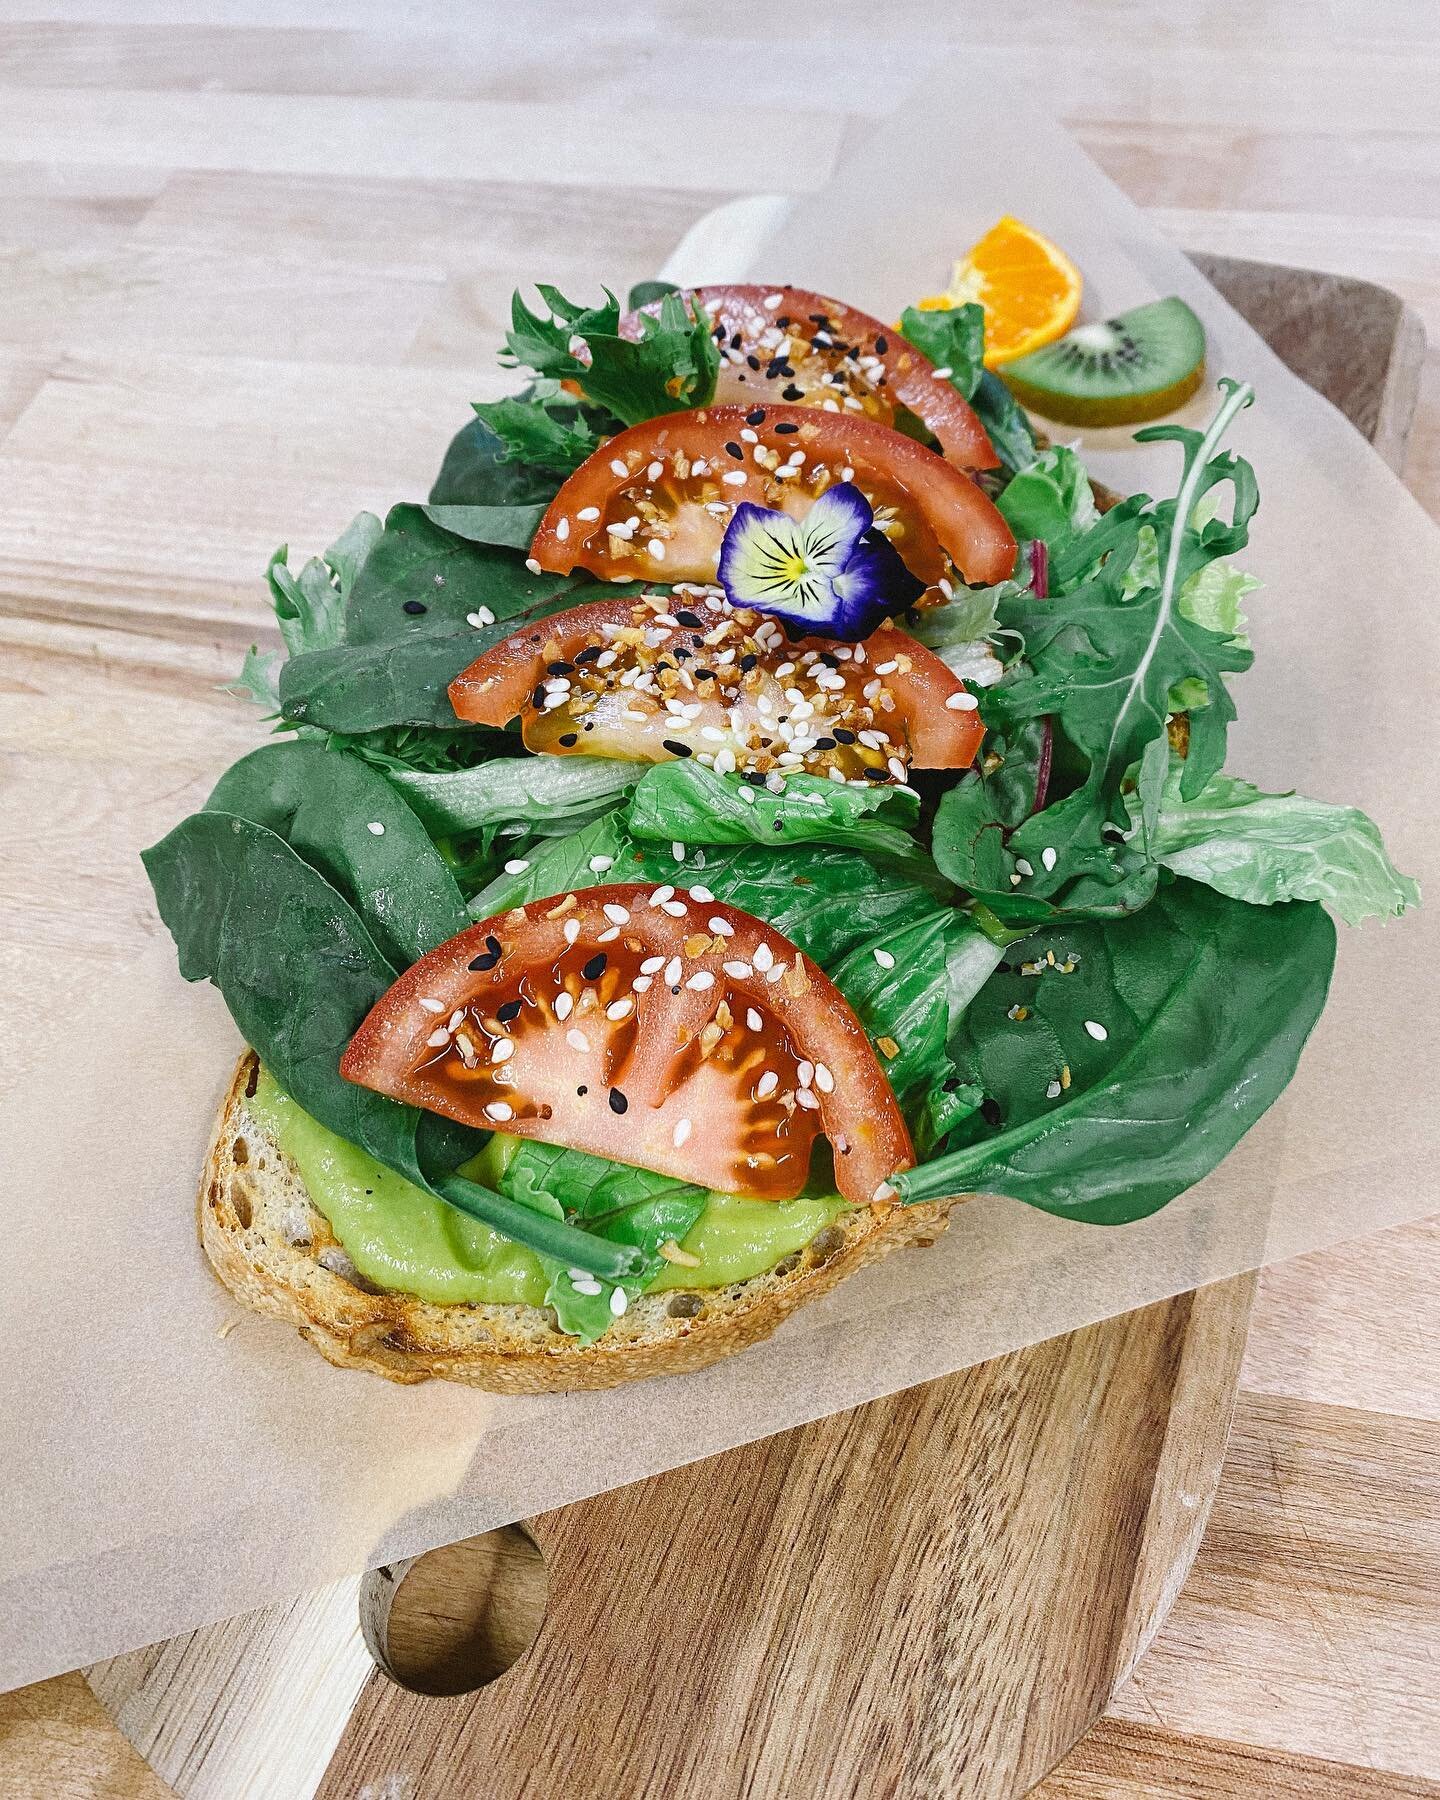 Some delicious and good looking avocado toast 😍we serve it on our house baked sourdough bread. We use avocados from our local farmers. Topped with organic greens and delicious tomatoes! #konaorigins #supportlocal #blessedandgrateful